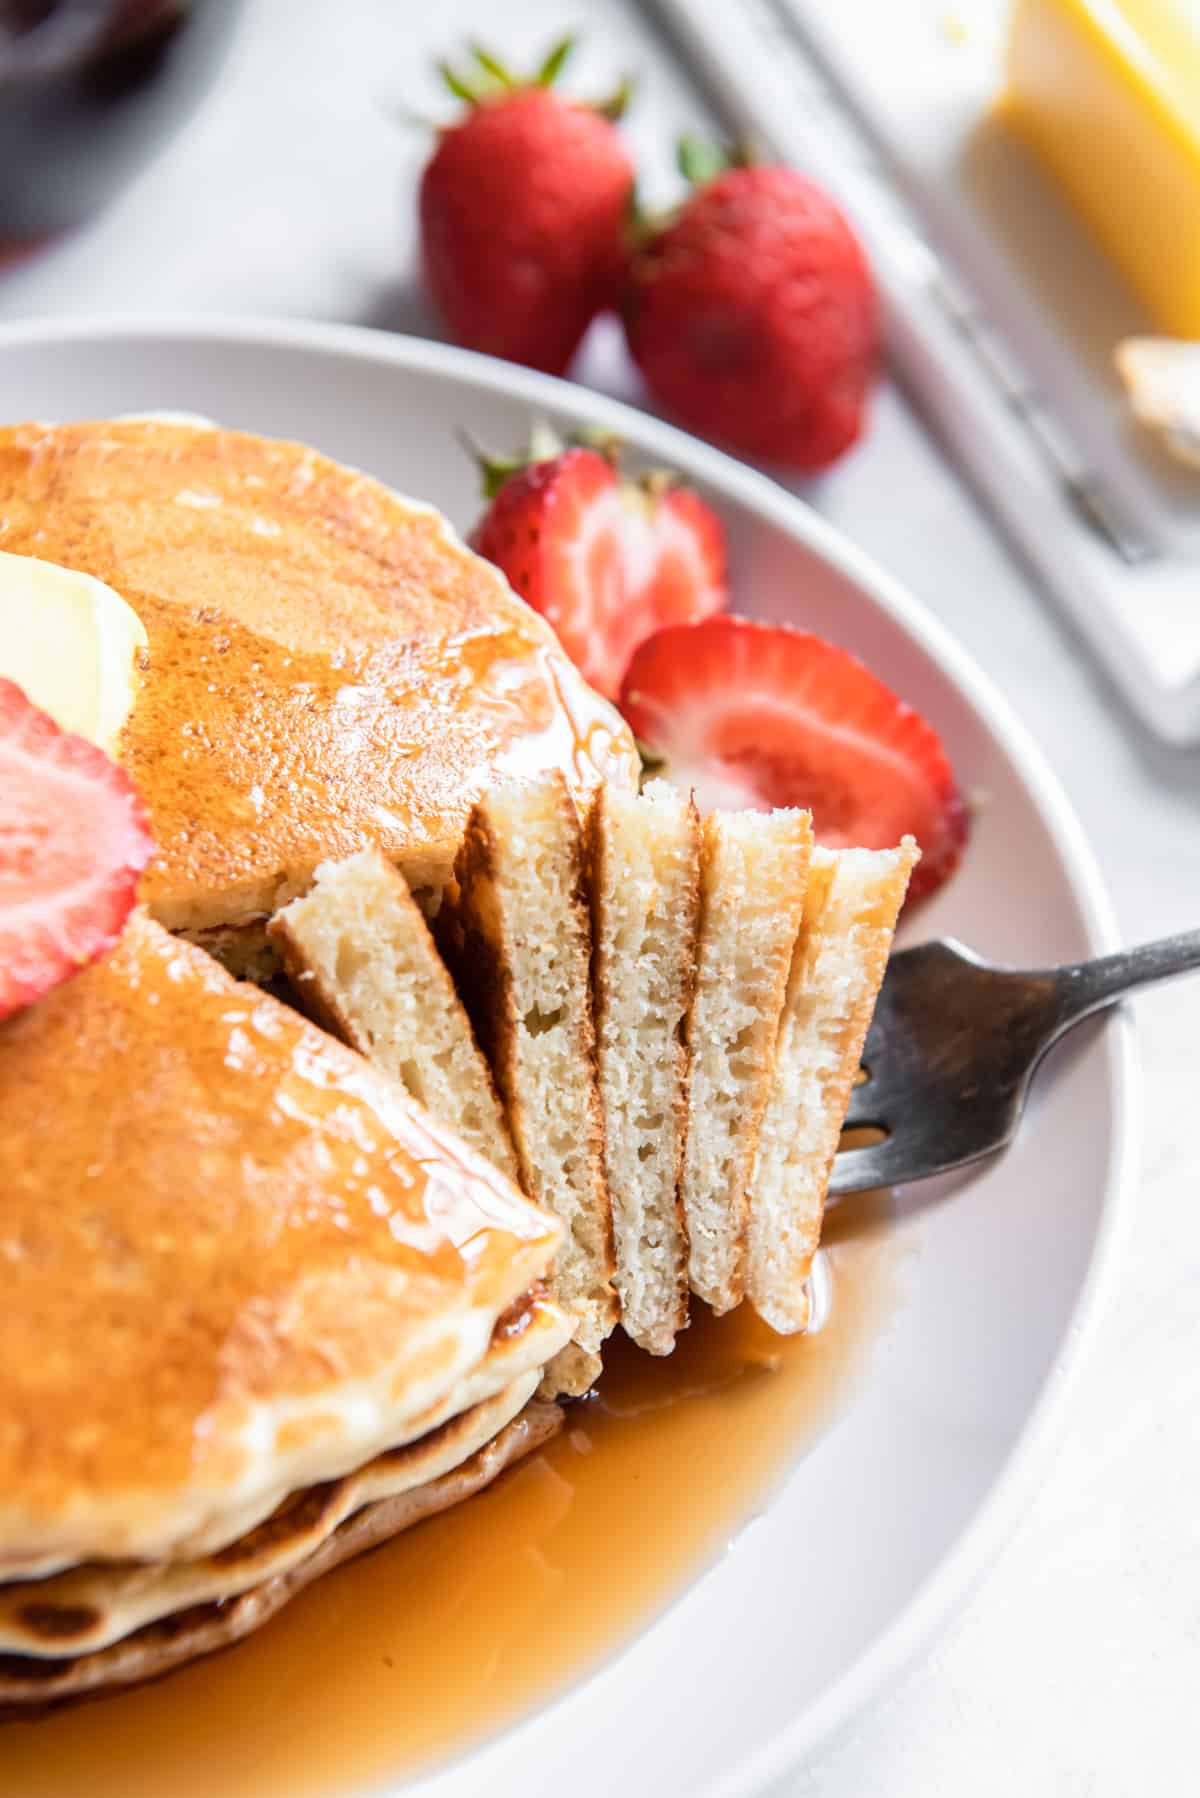 a forkful of buttermilk pancakes resting on a plate of buttermilk pancakes with syrup, butter, and a halved strawberry.